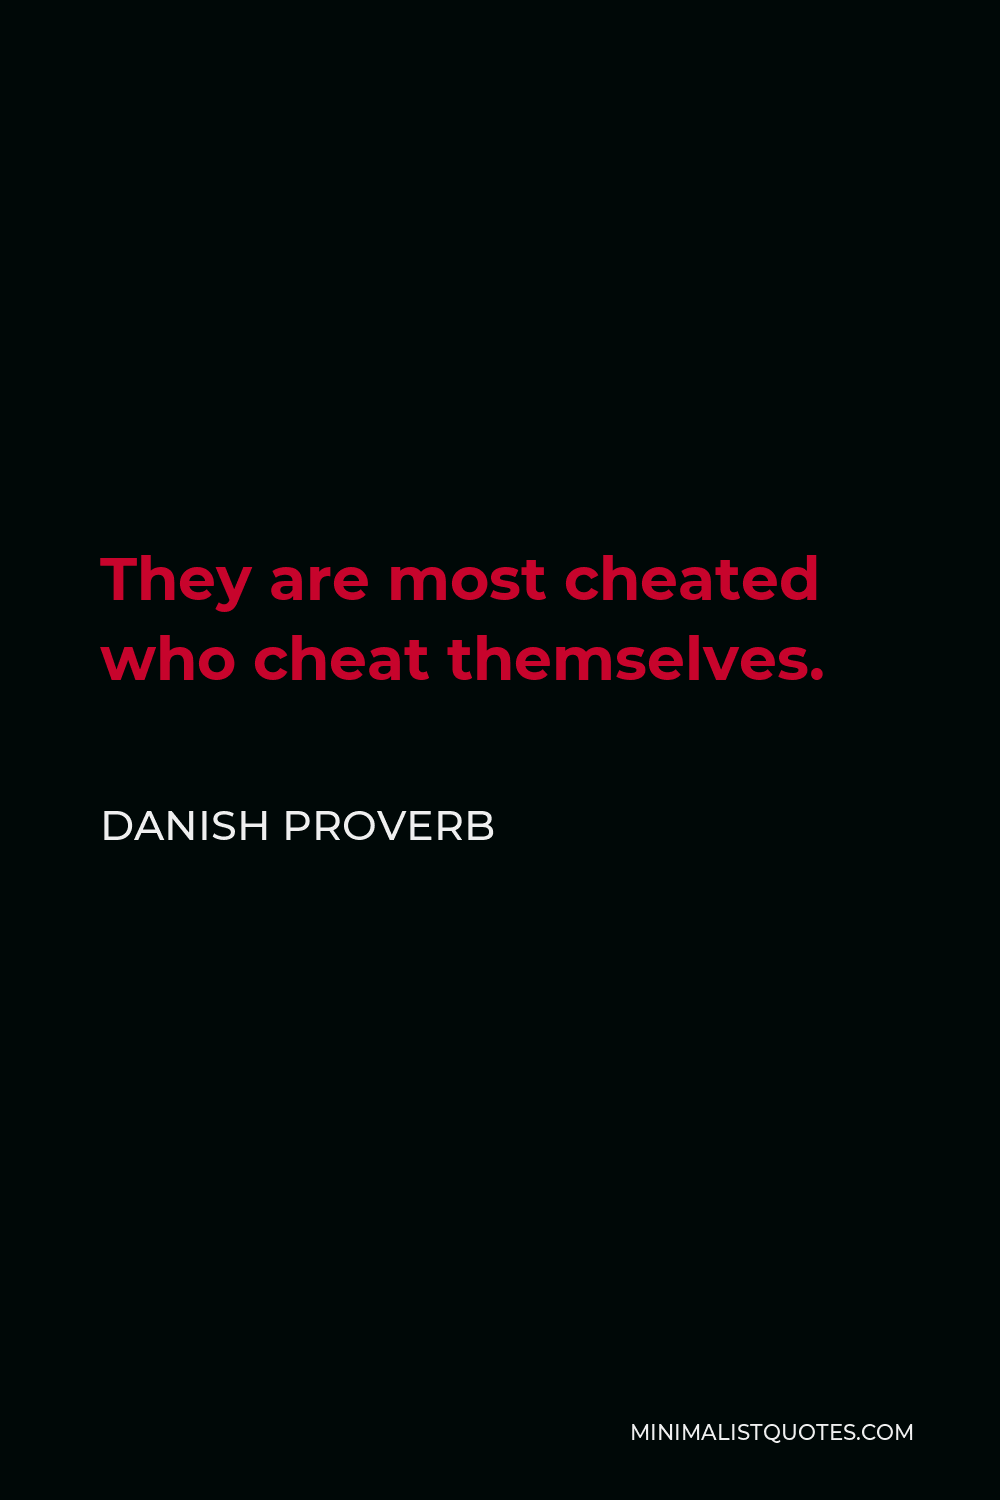 Danish Proverb Quote - They are most cheated who cheat themselves.